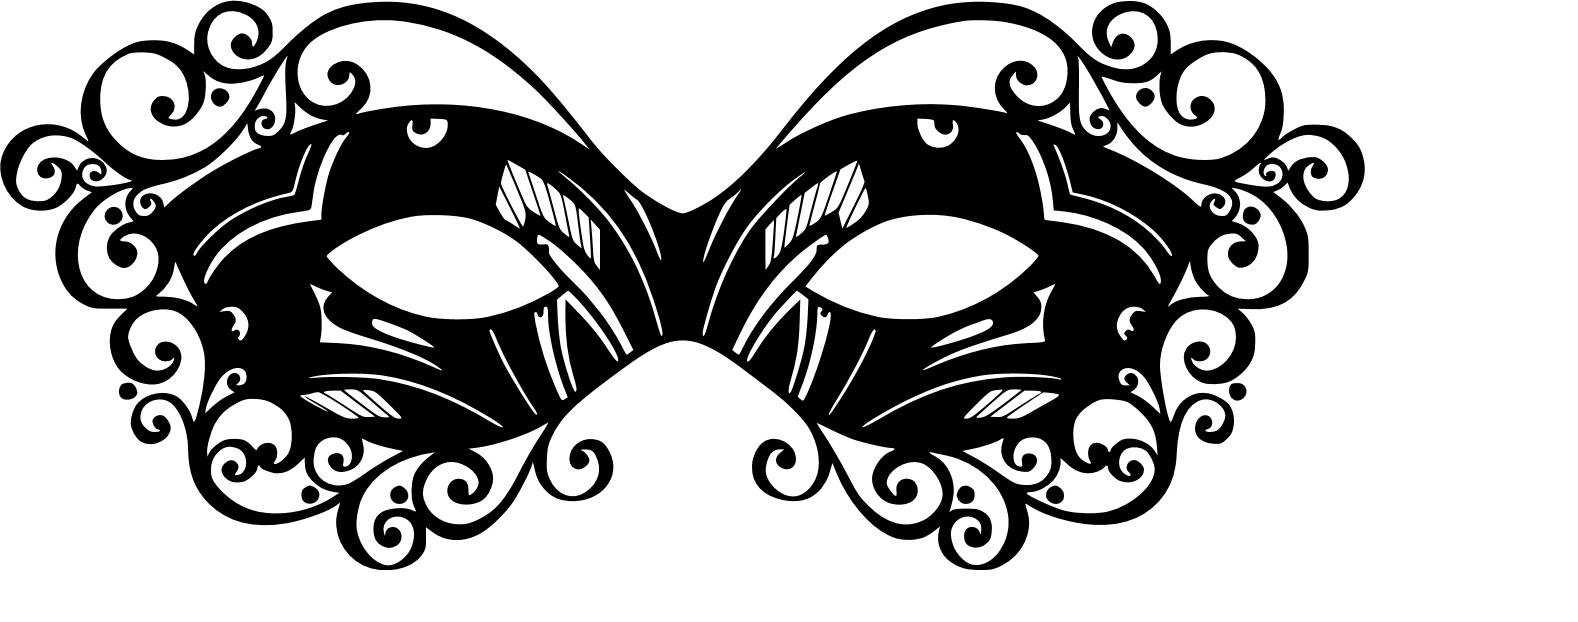 Download Masquerade Mask SVG Cutting file | Etsy